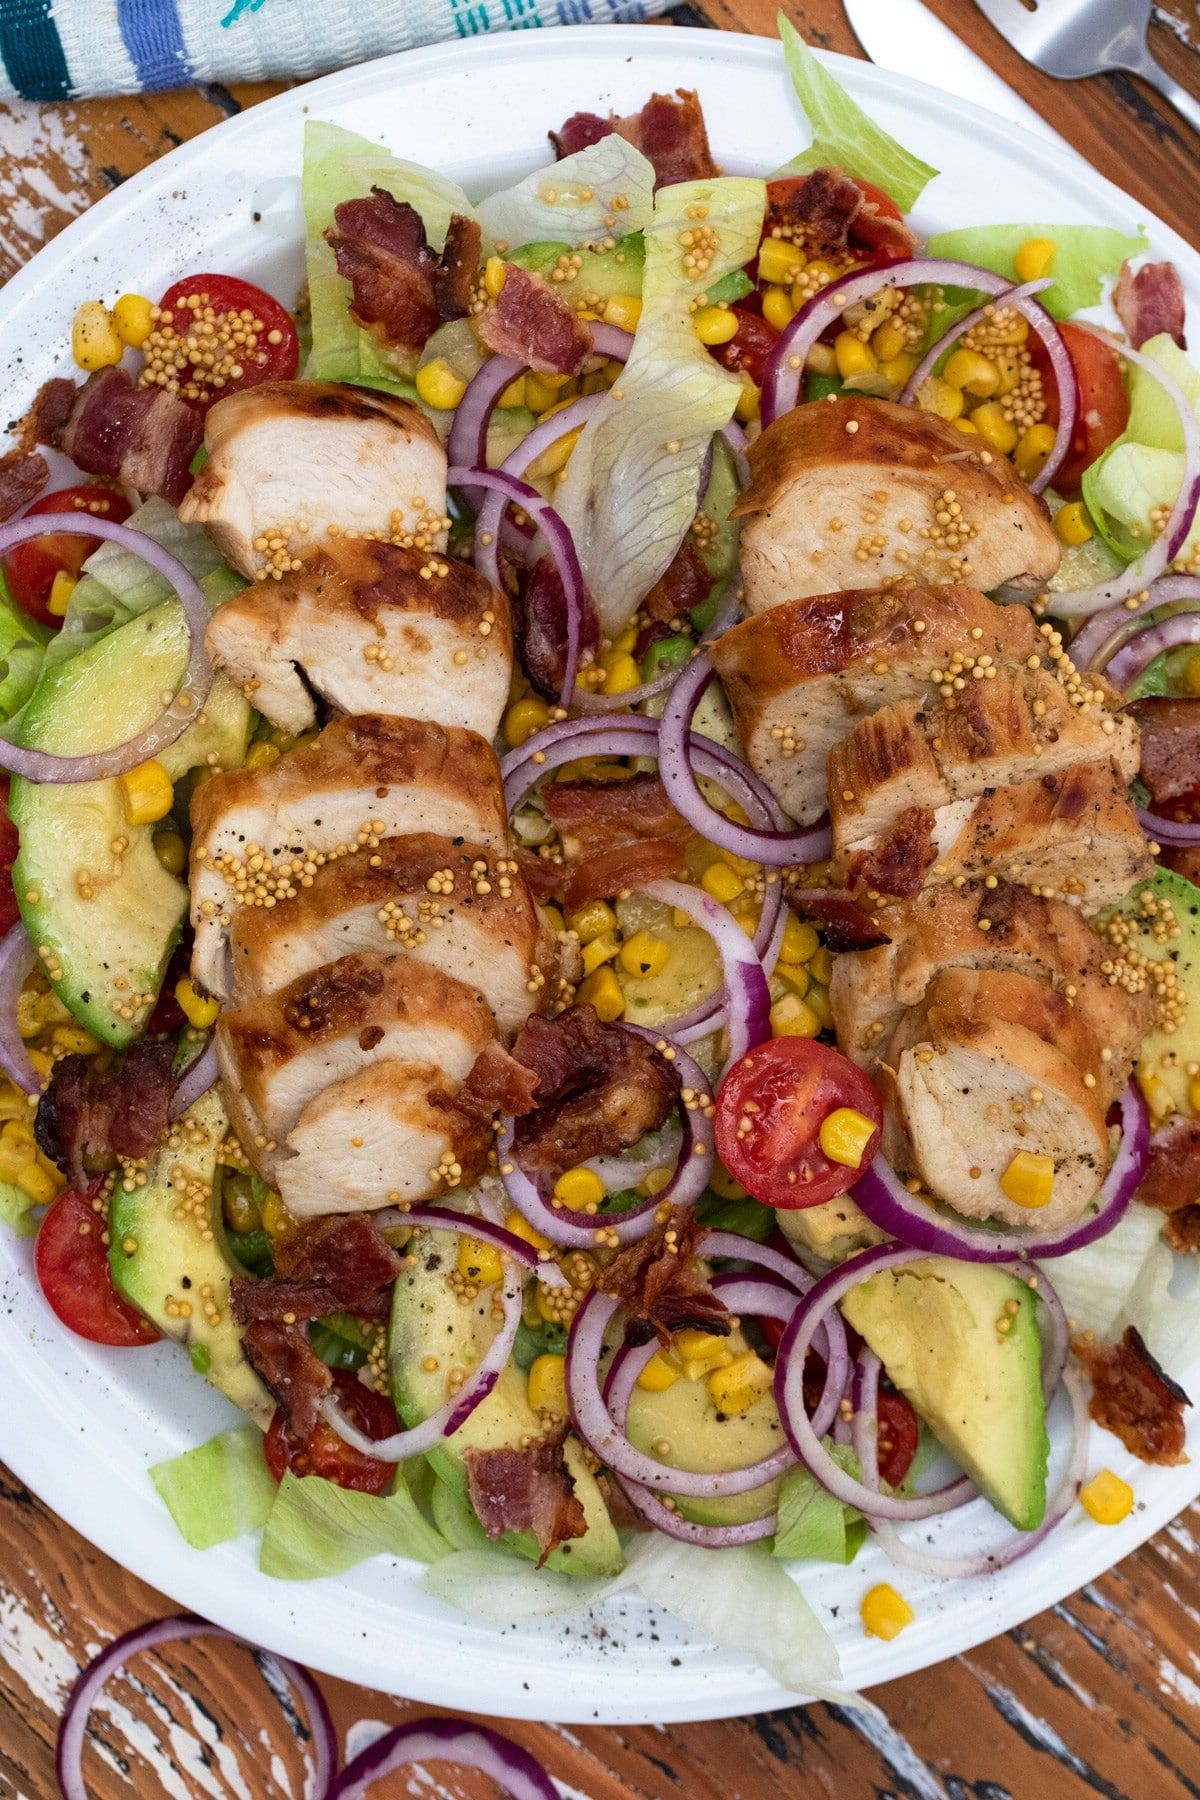 slicd chicken breasts on salad greens with onion tomato and avocado on white plate